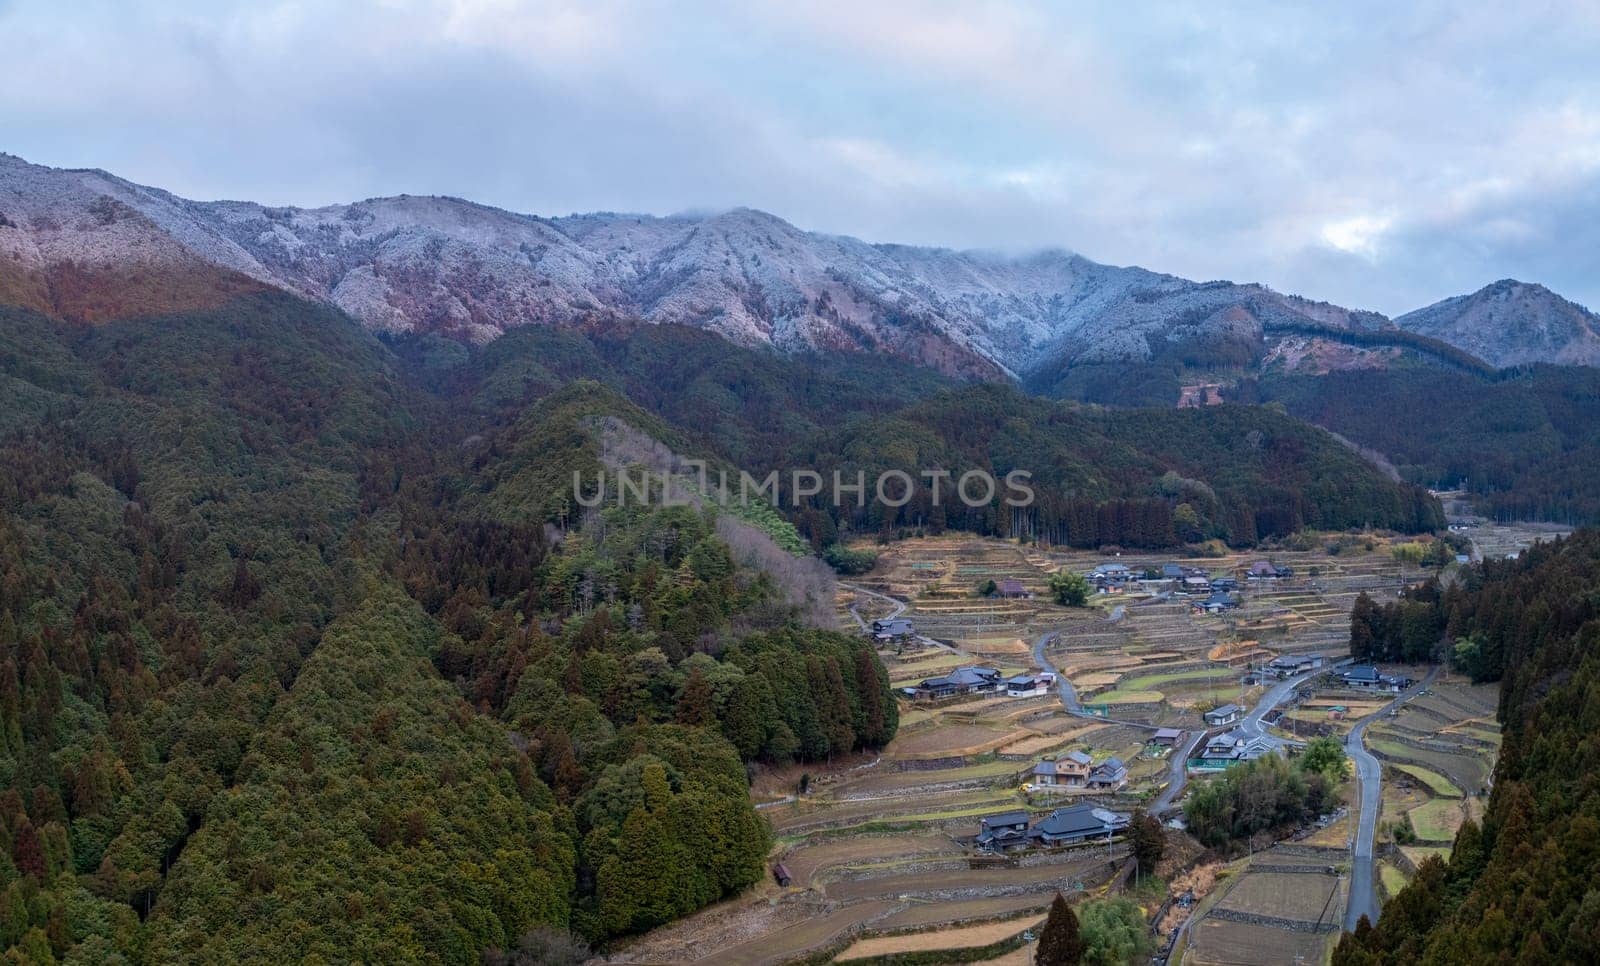 Terraced rice fields, houses, and snowy mountains in winter landscape by Osaze